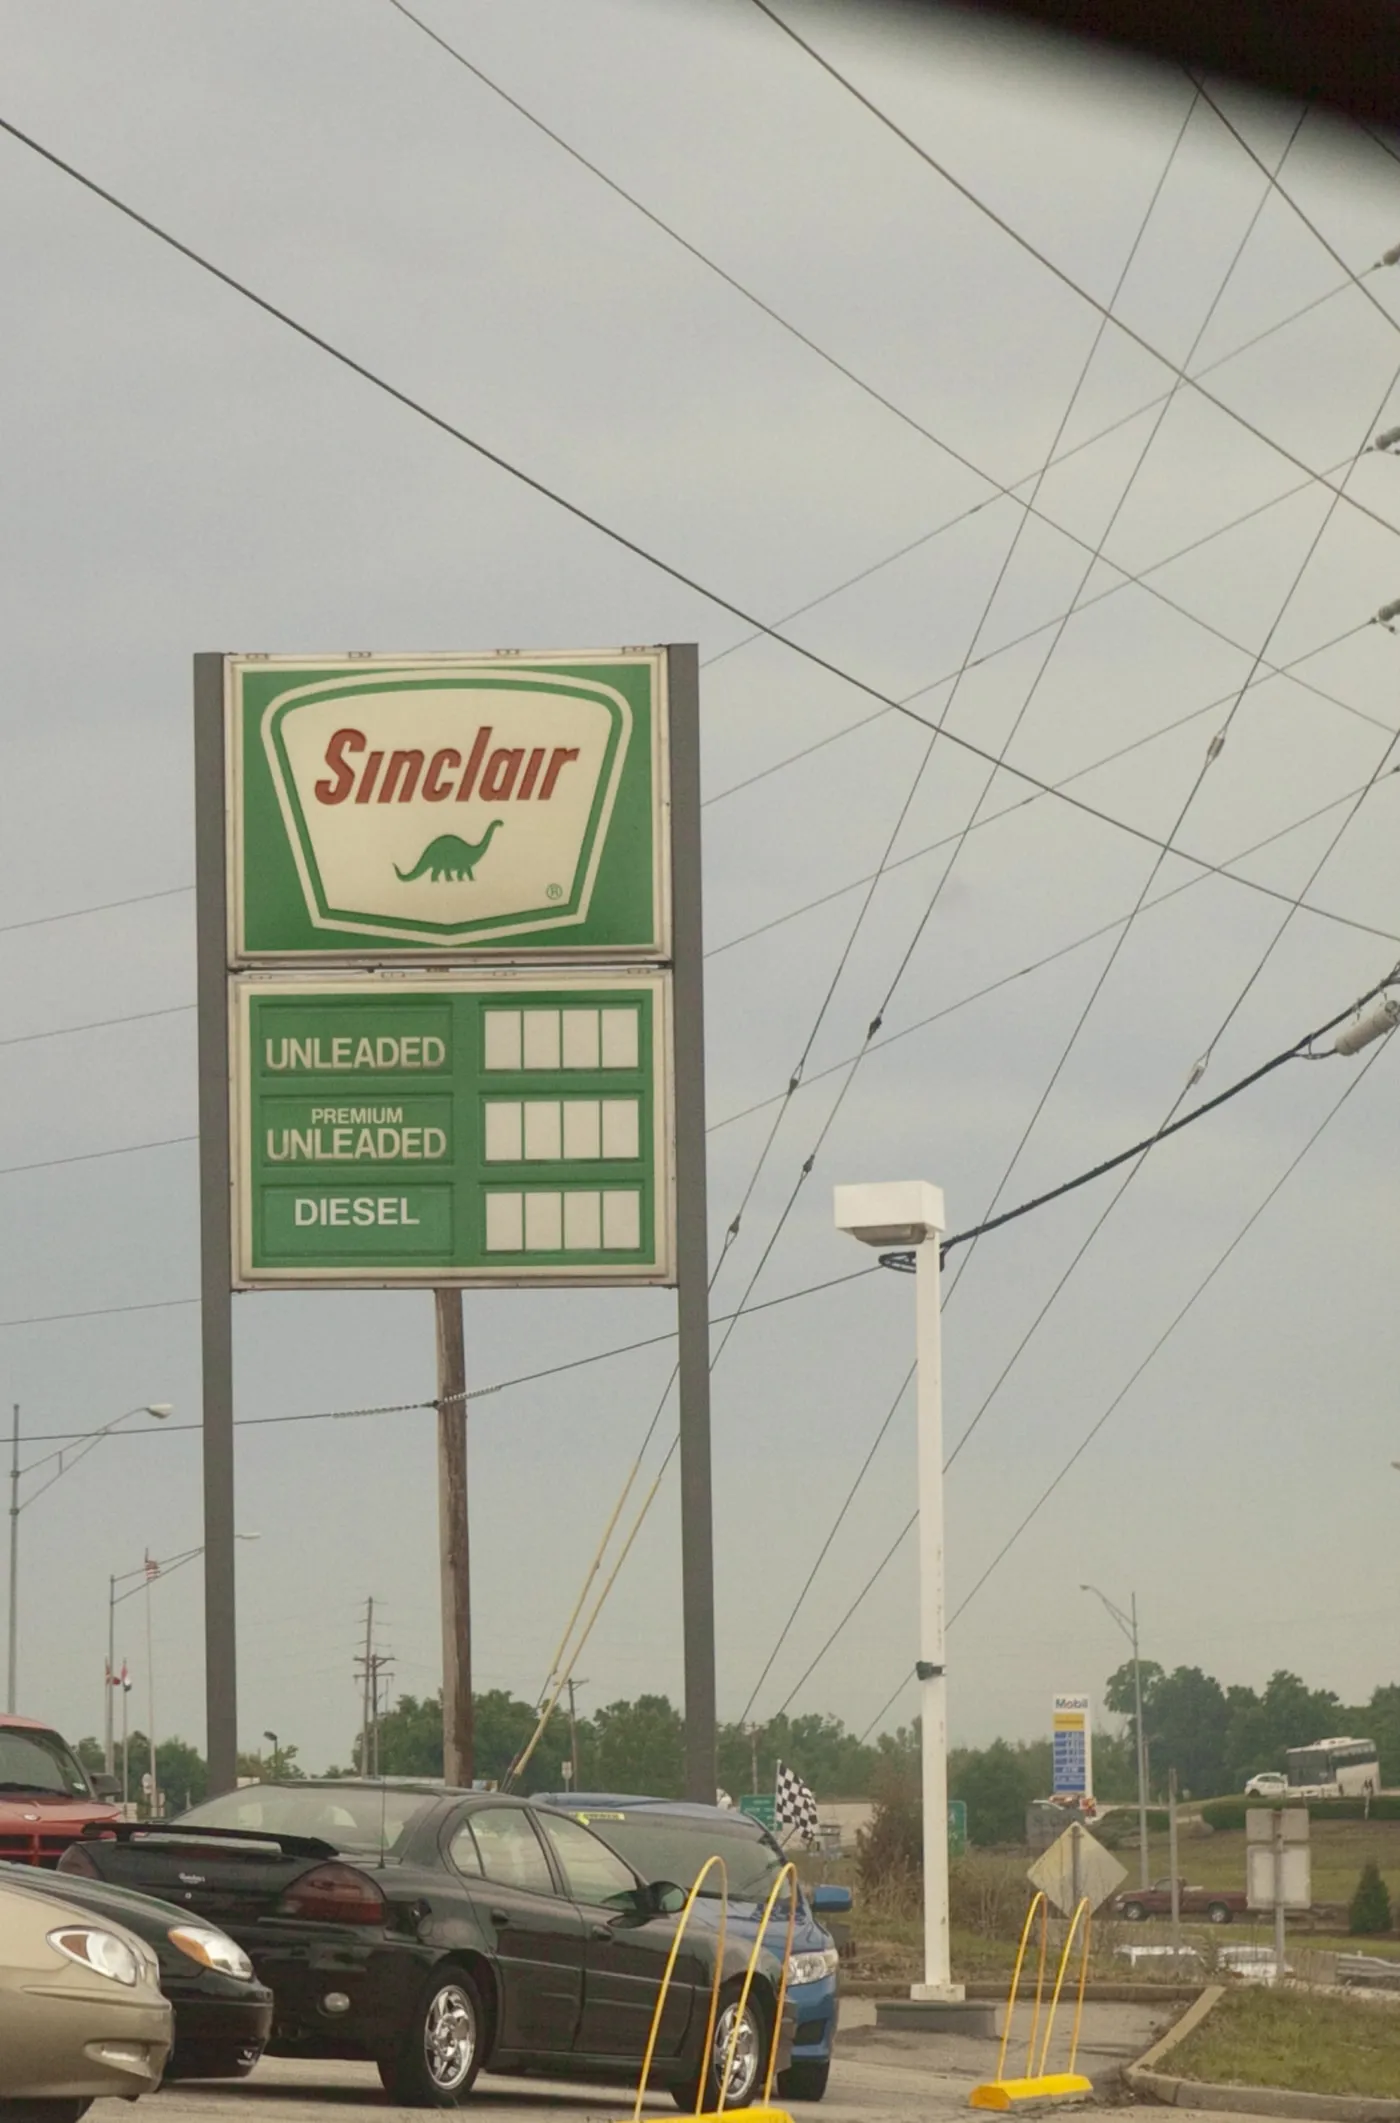 Sinclair gas station turned into a used car dealership in Missouri